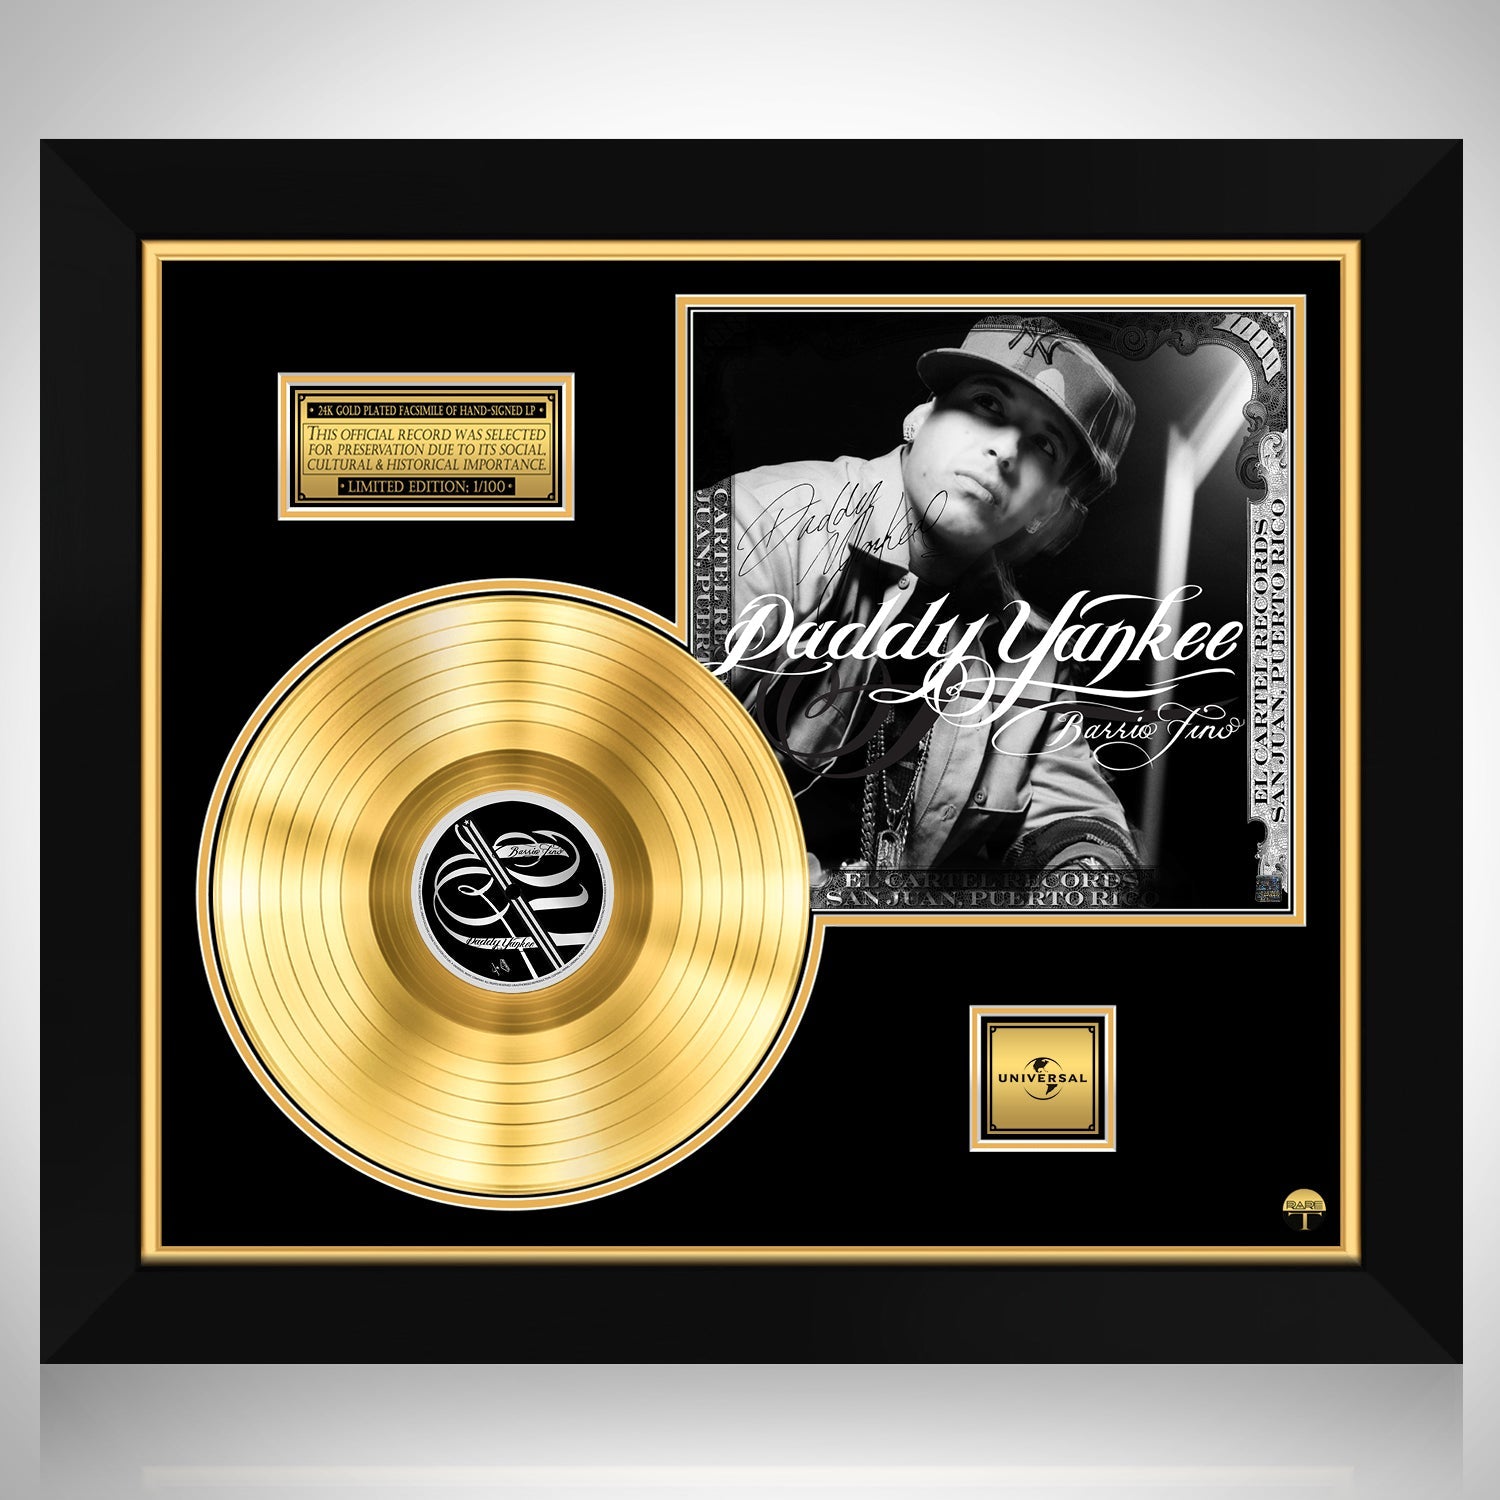 Discover “Barrio Fino” by Daddy Yankee, the 473rd greatest album of al